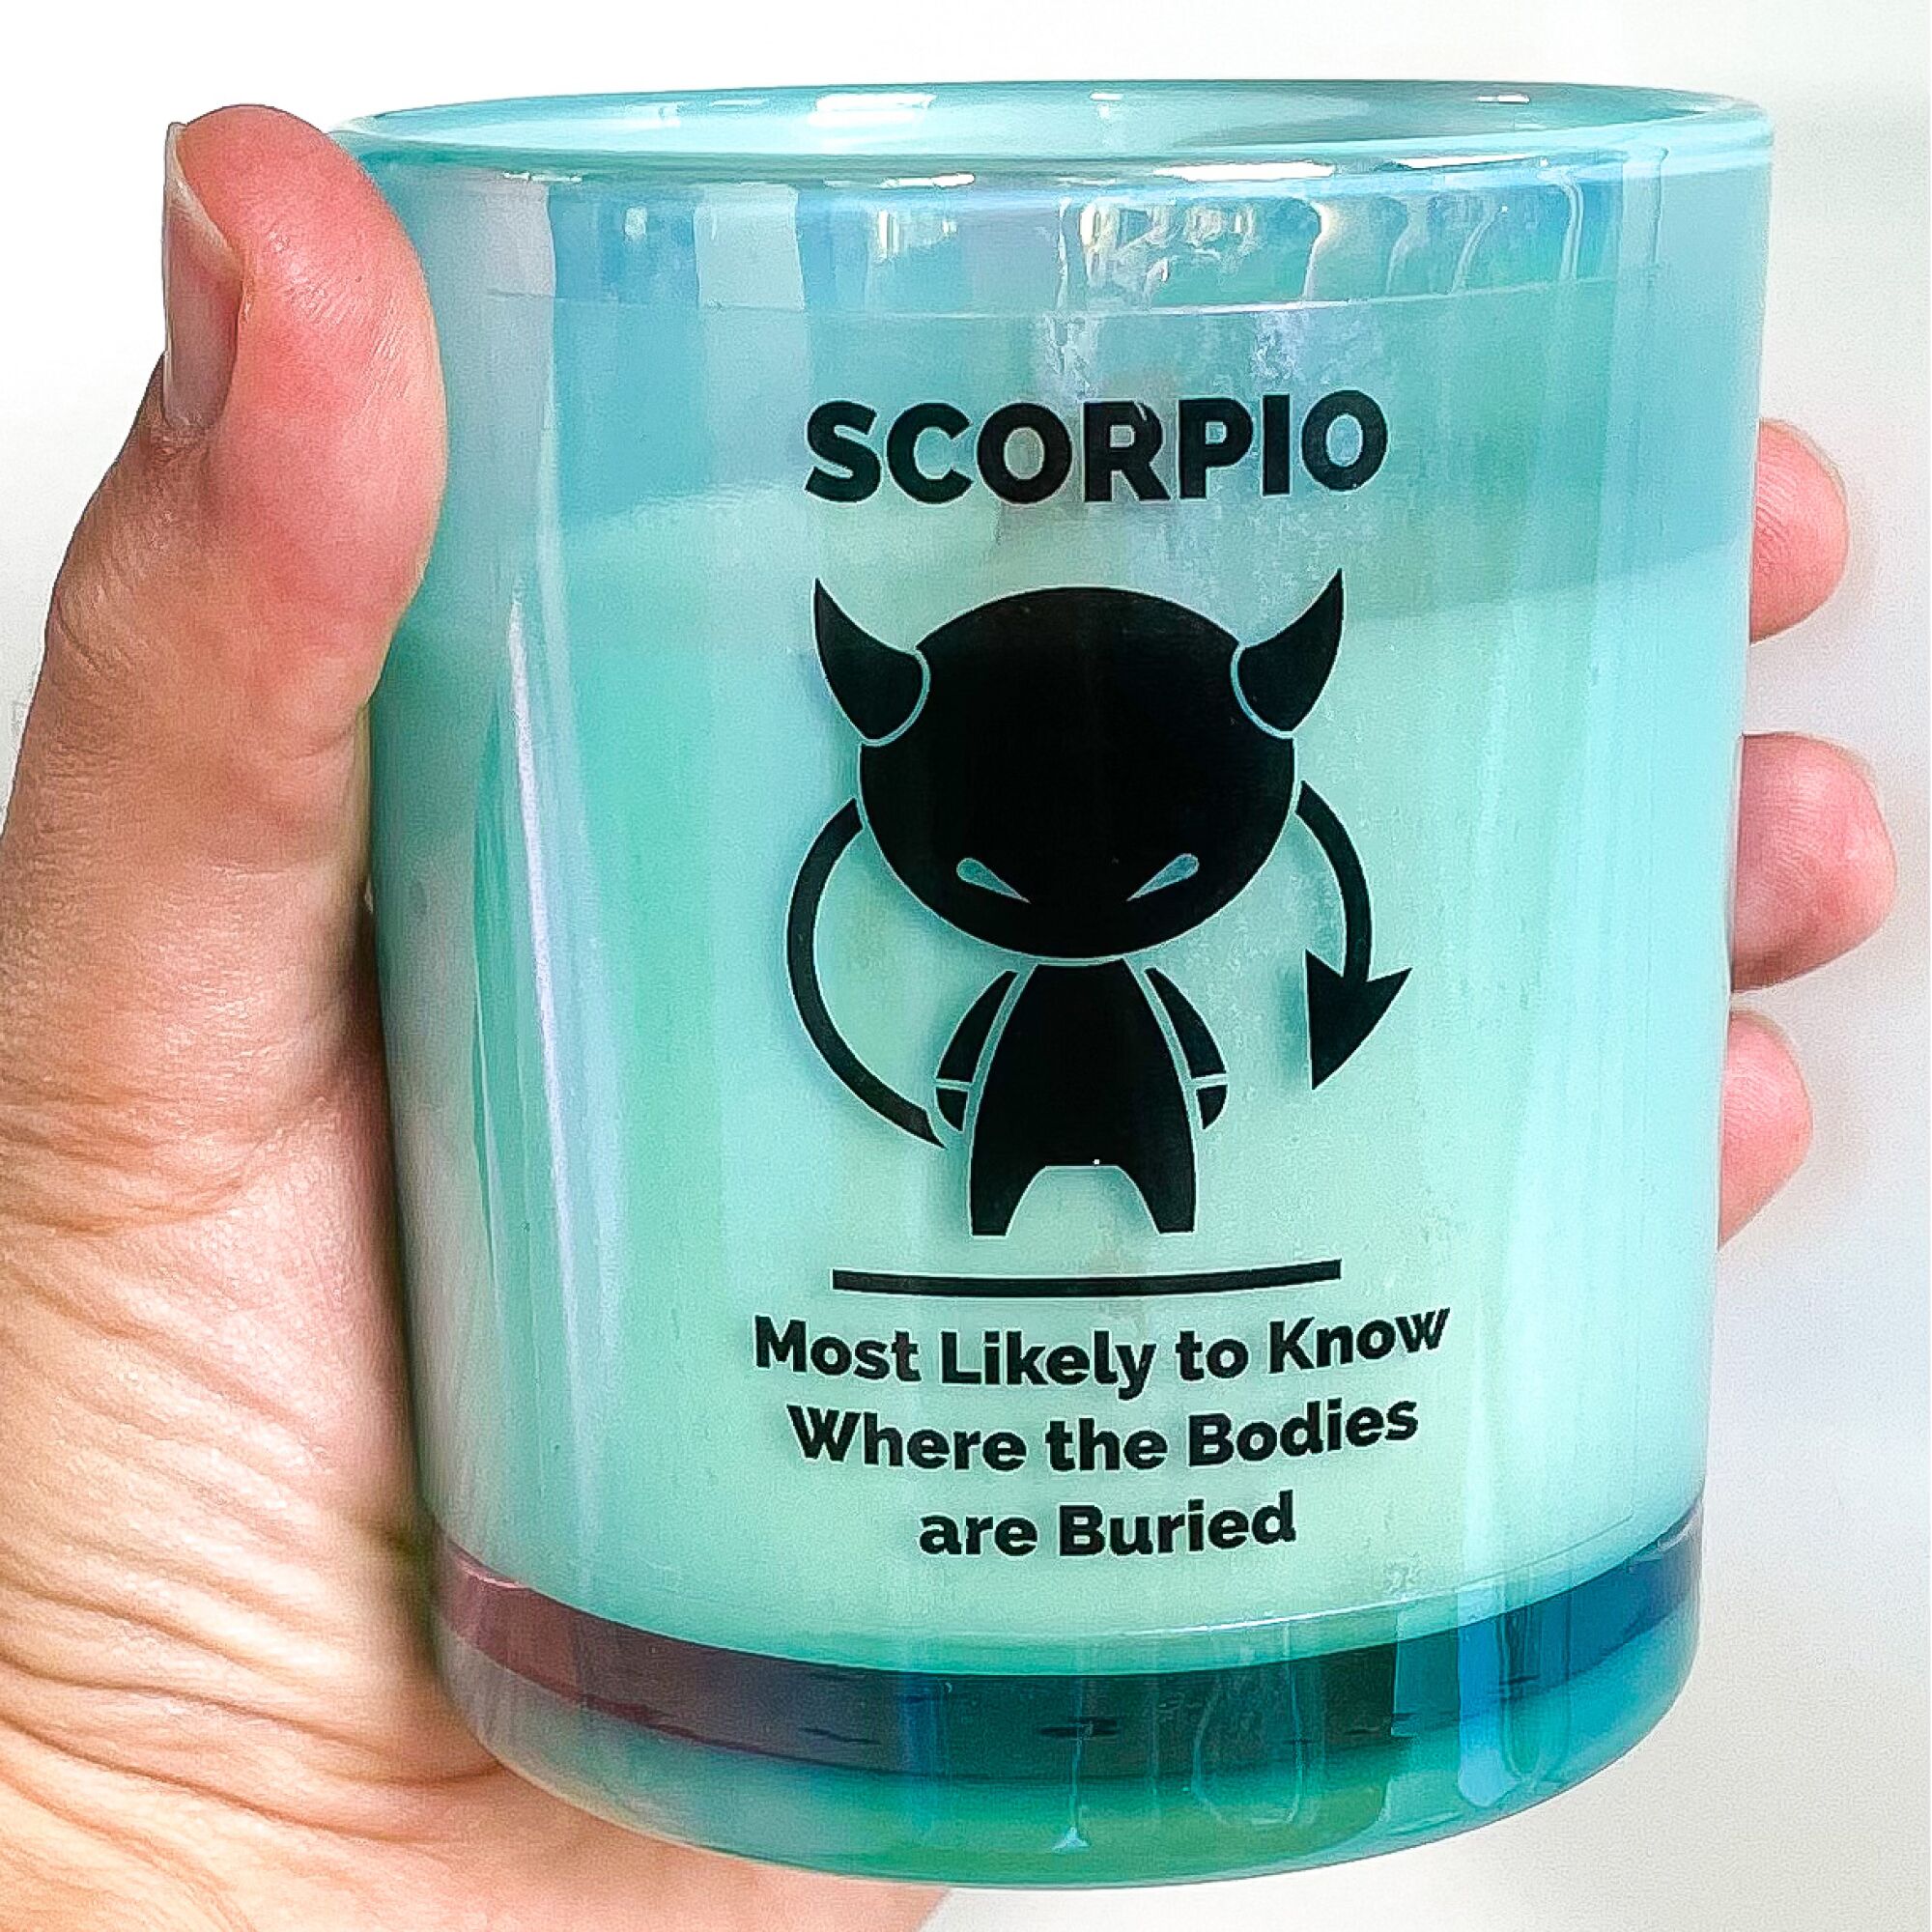 A "Scorpio" candle in a person's hand.